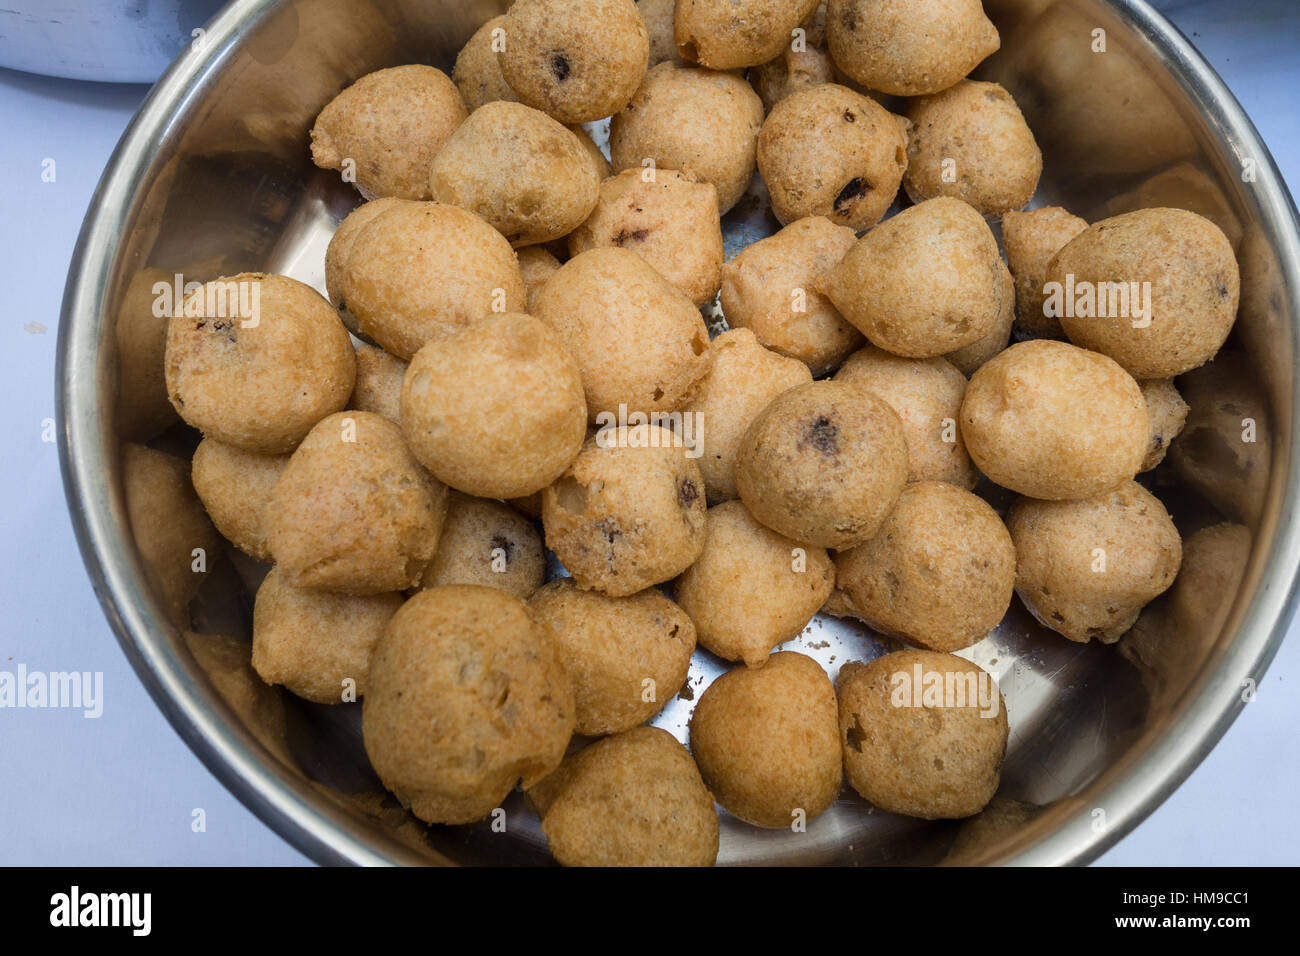 Purnam burelu is a popular south indian sweet made of lentils,jaggery and prepared duing special occasions Stock Photo